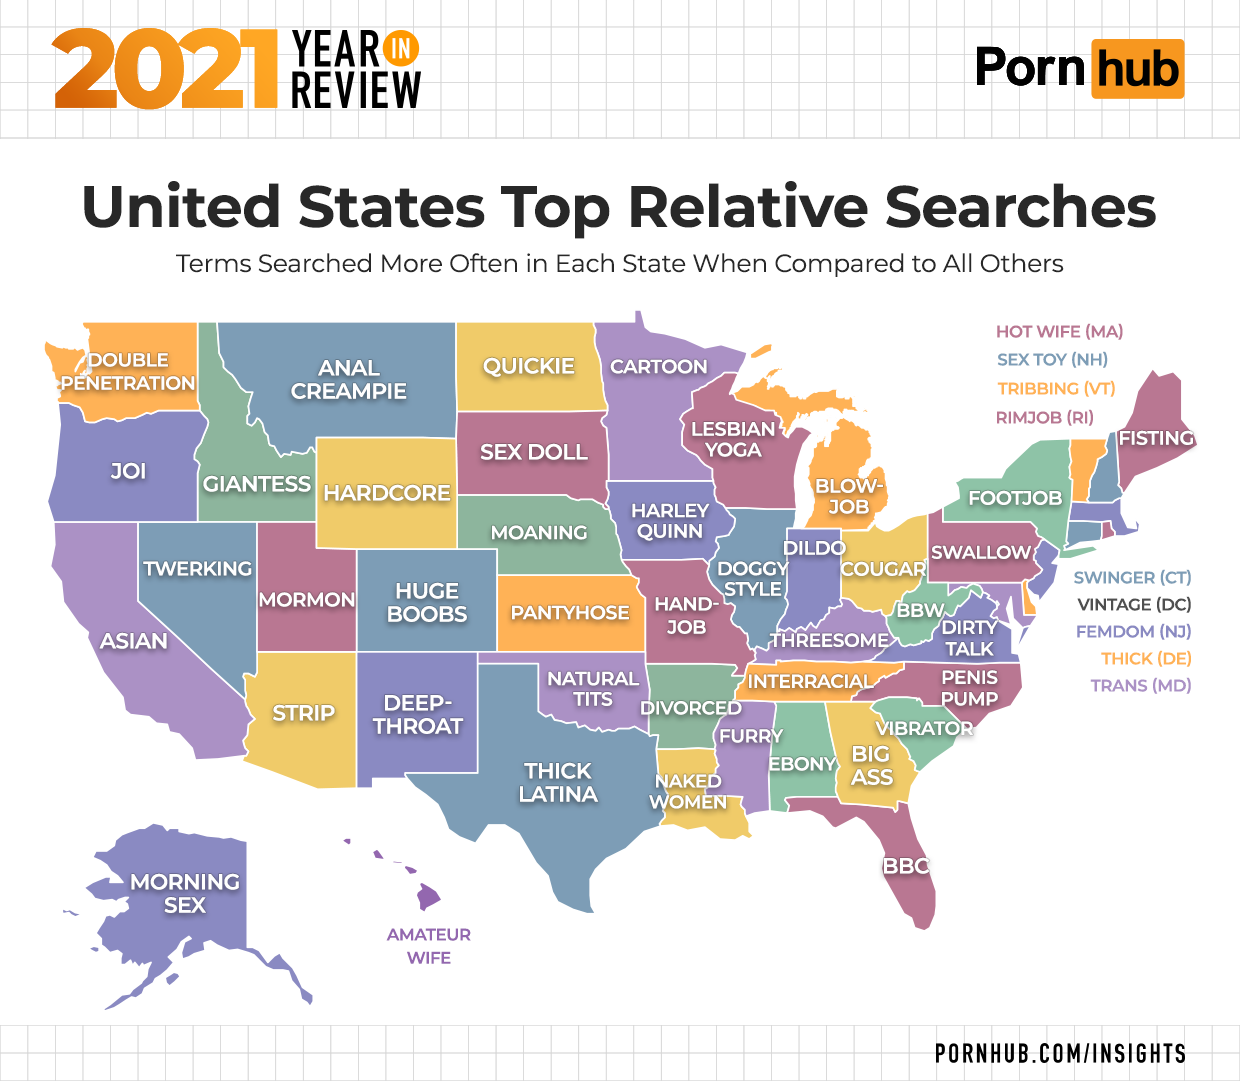 2021 Year in Review – Pornhub Insights